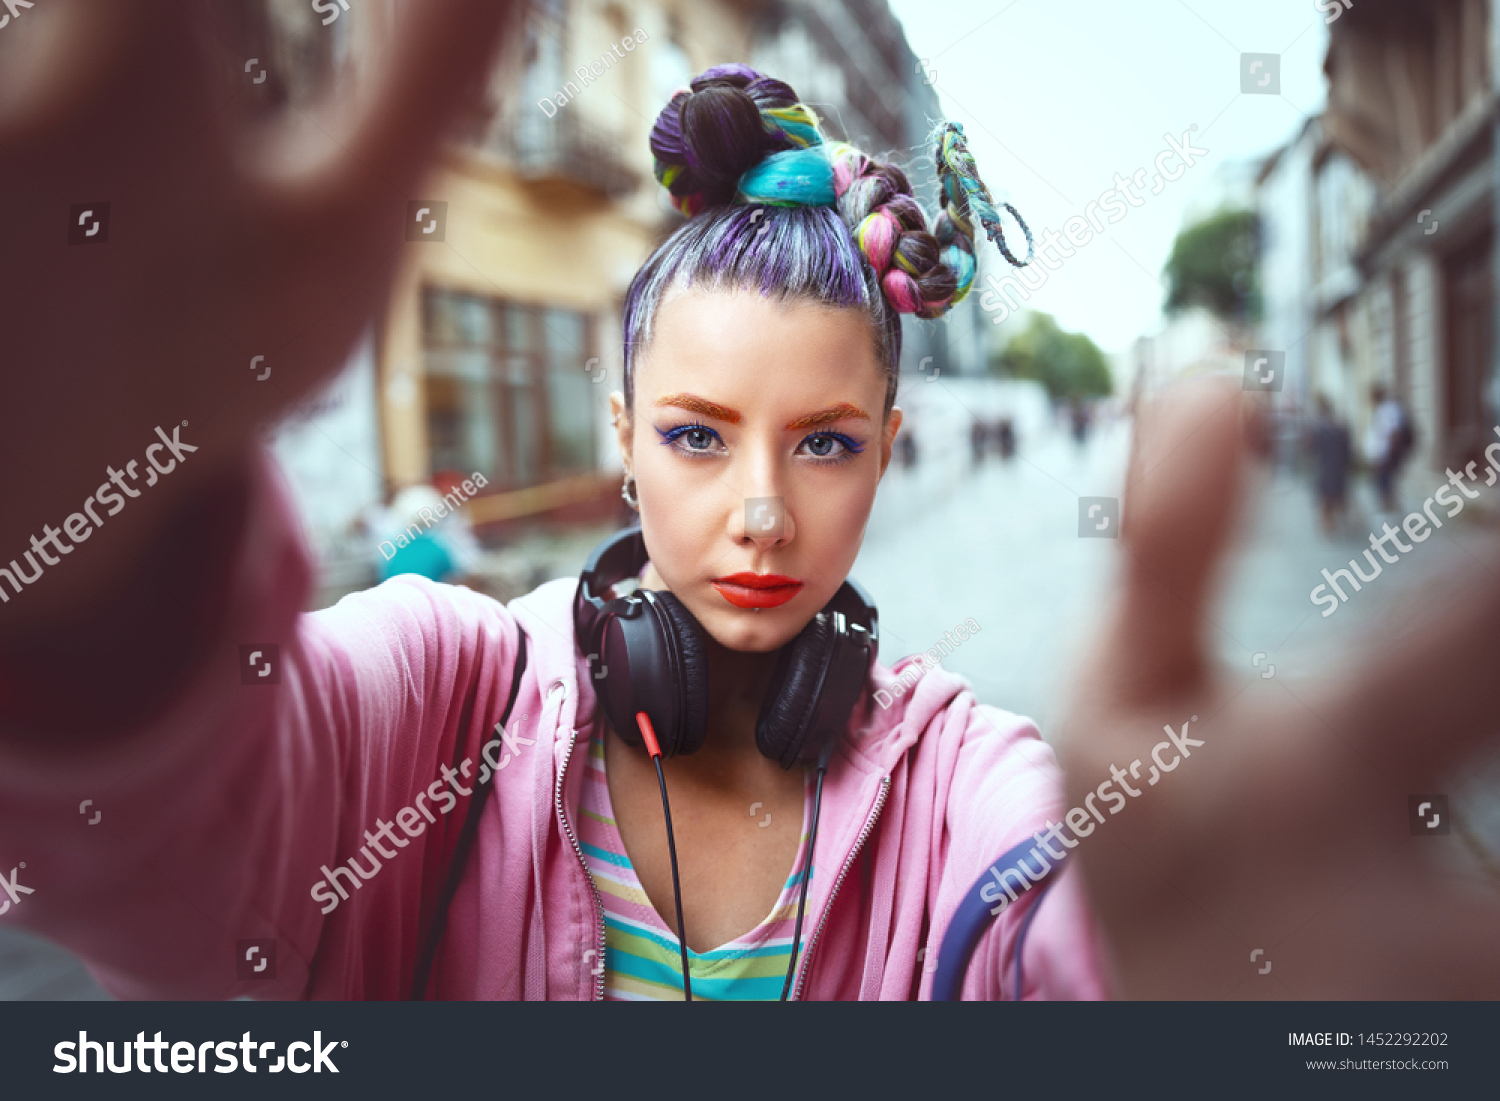 Cool funky young girl with headphones and crazy hair enjoy power of music taking selfie on street – hipster woman with trendy avant-garde look having fun - Music fan concept with playful carefree teen #1452292202